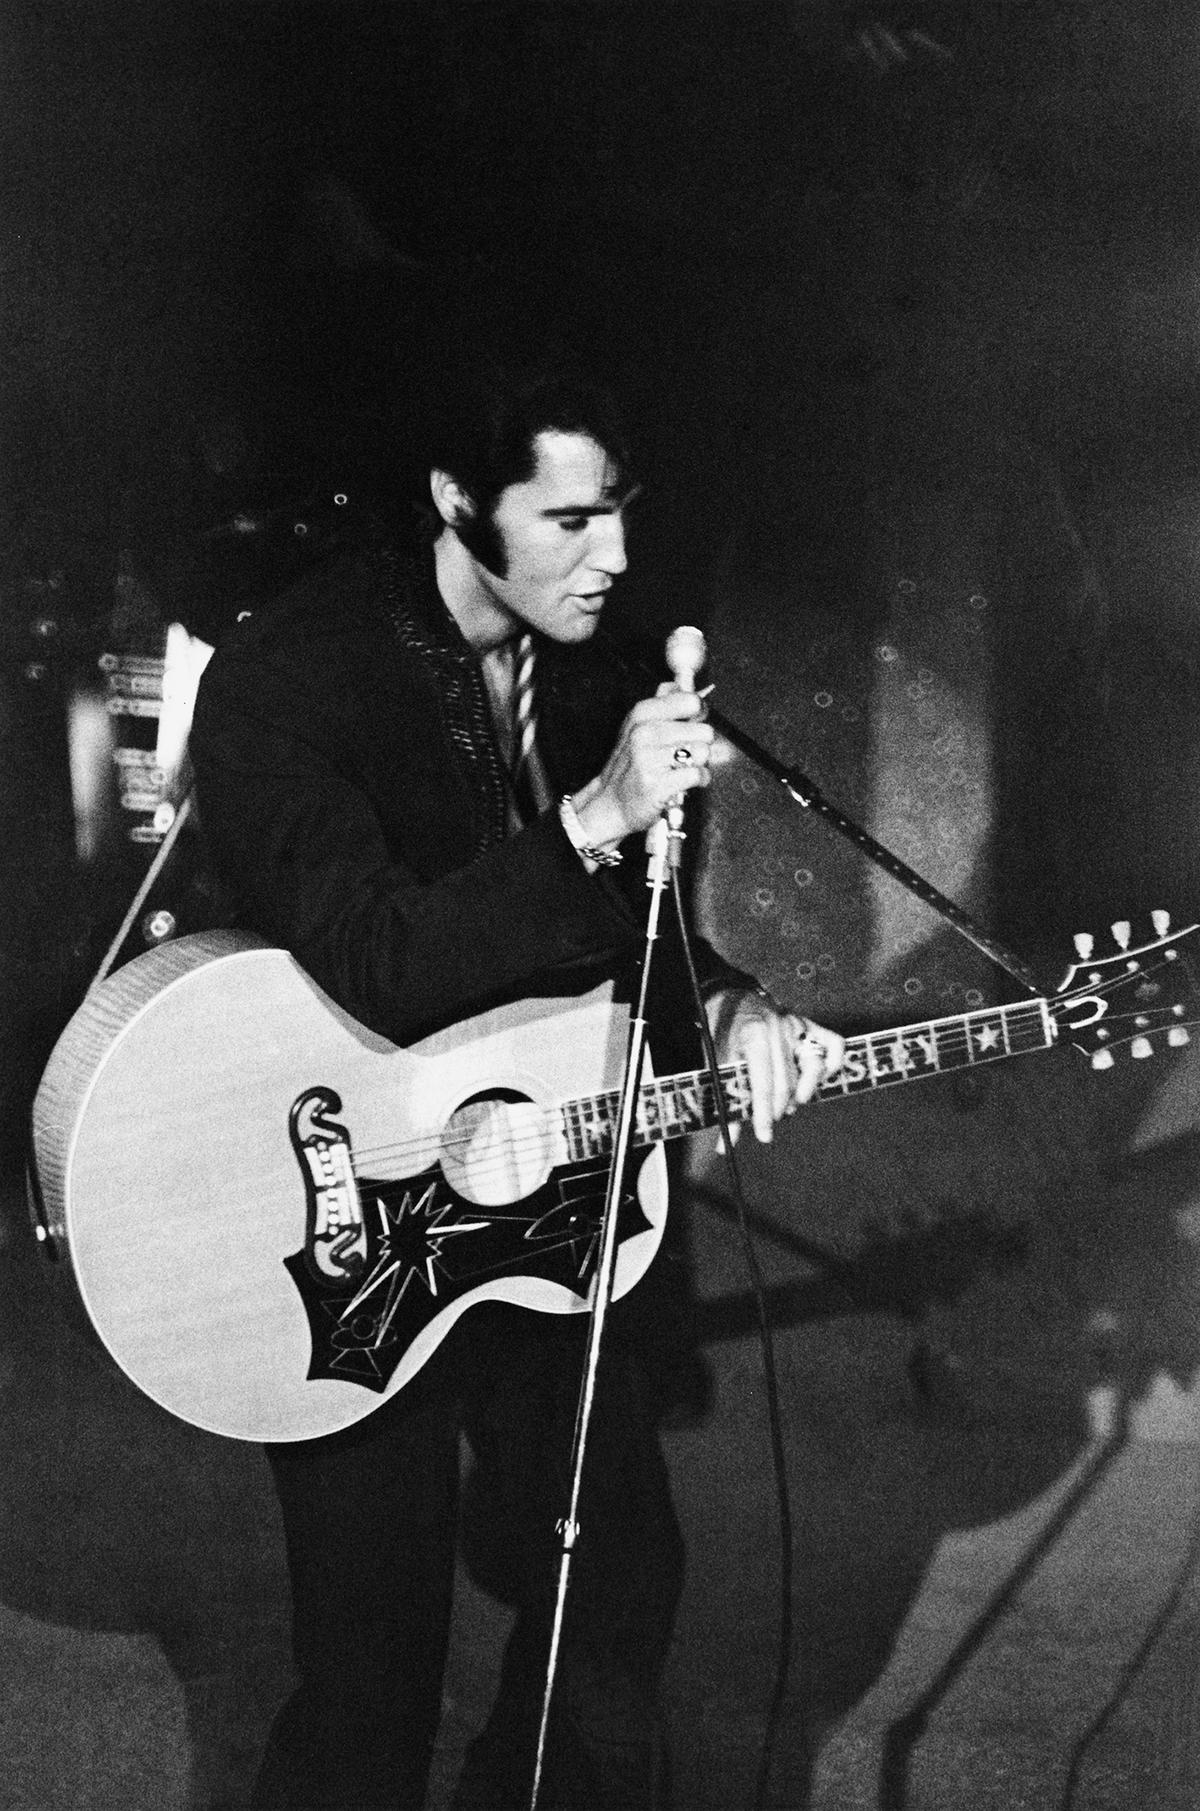 Elvis Presley performing at the Las Vegas International Hotel in Aug. 1969. (Archive Photos/Getty Images)